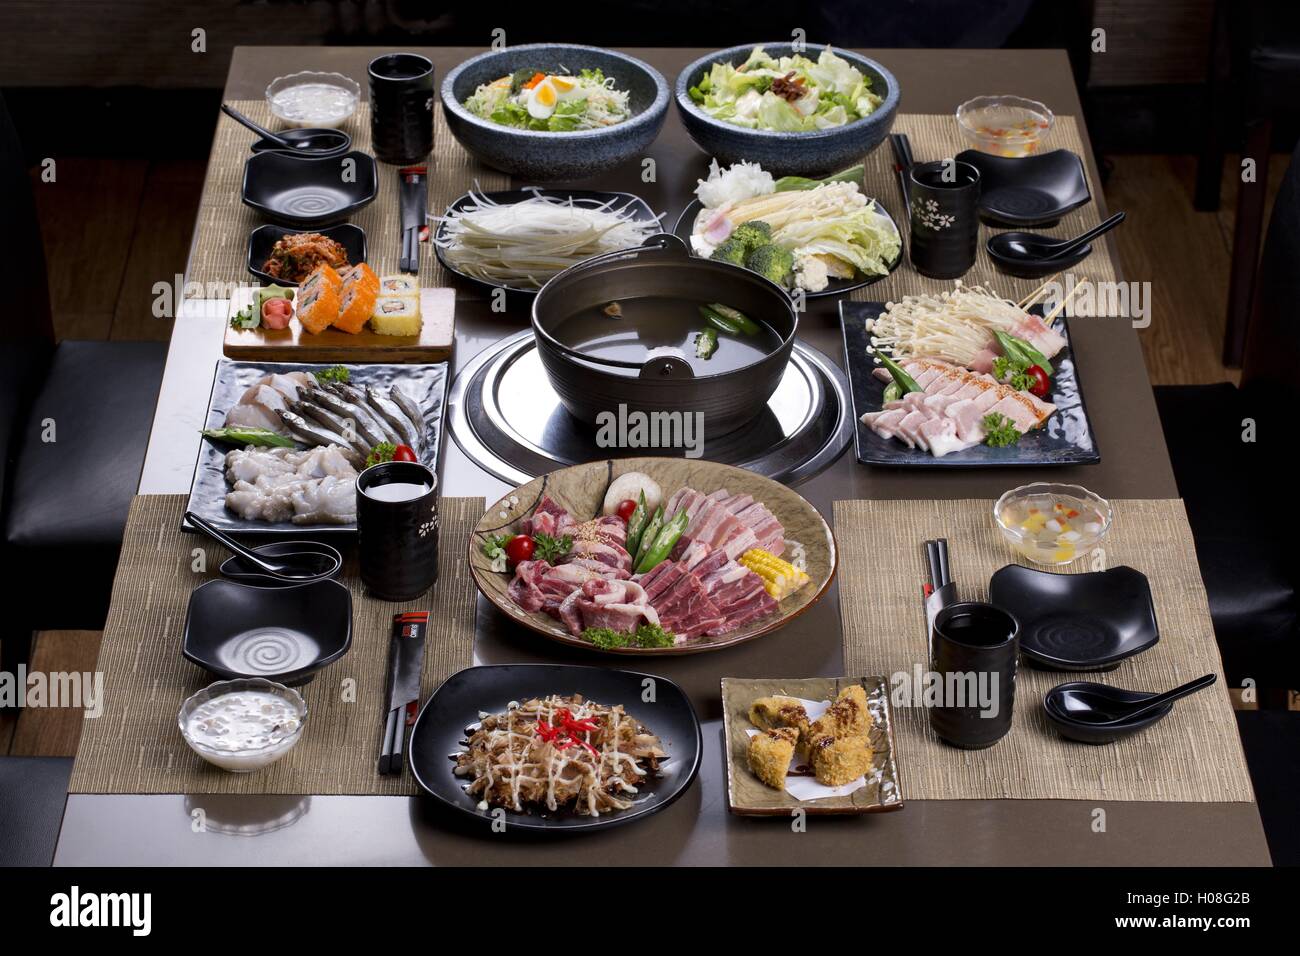 https://c8.alamy.com/comp/H08G2B/a-traditional-japanese-style-of-hot-pot-are-being-served-on-the-table-H08G2B.jpg